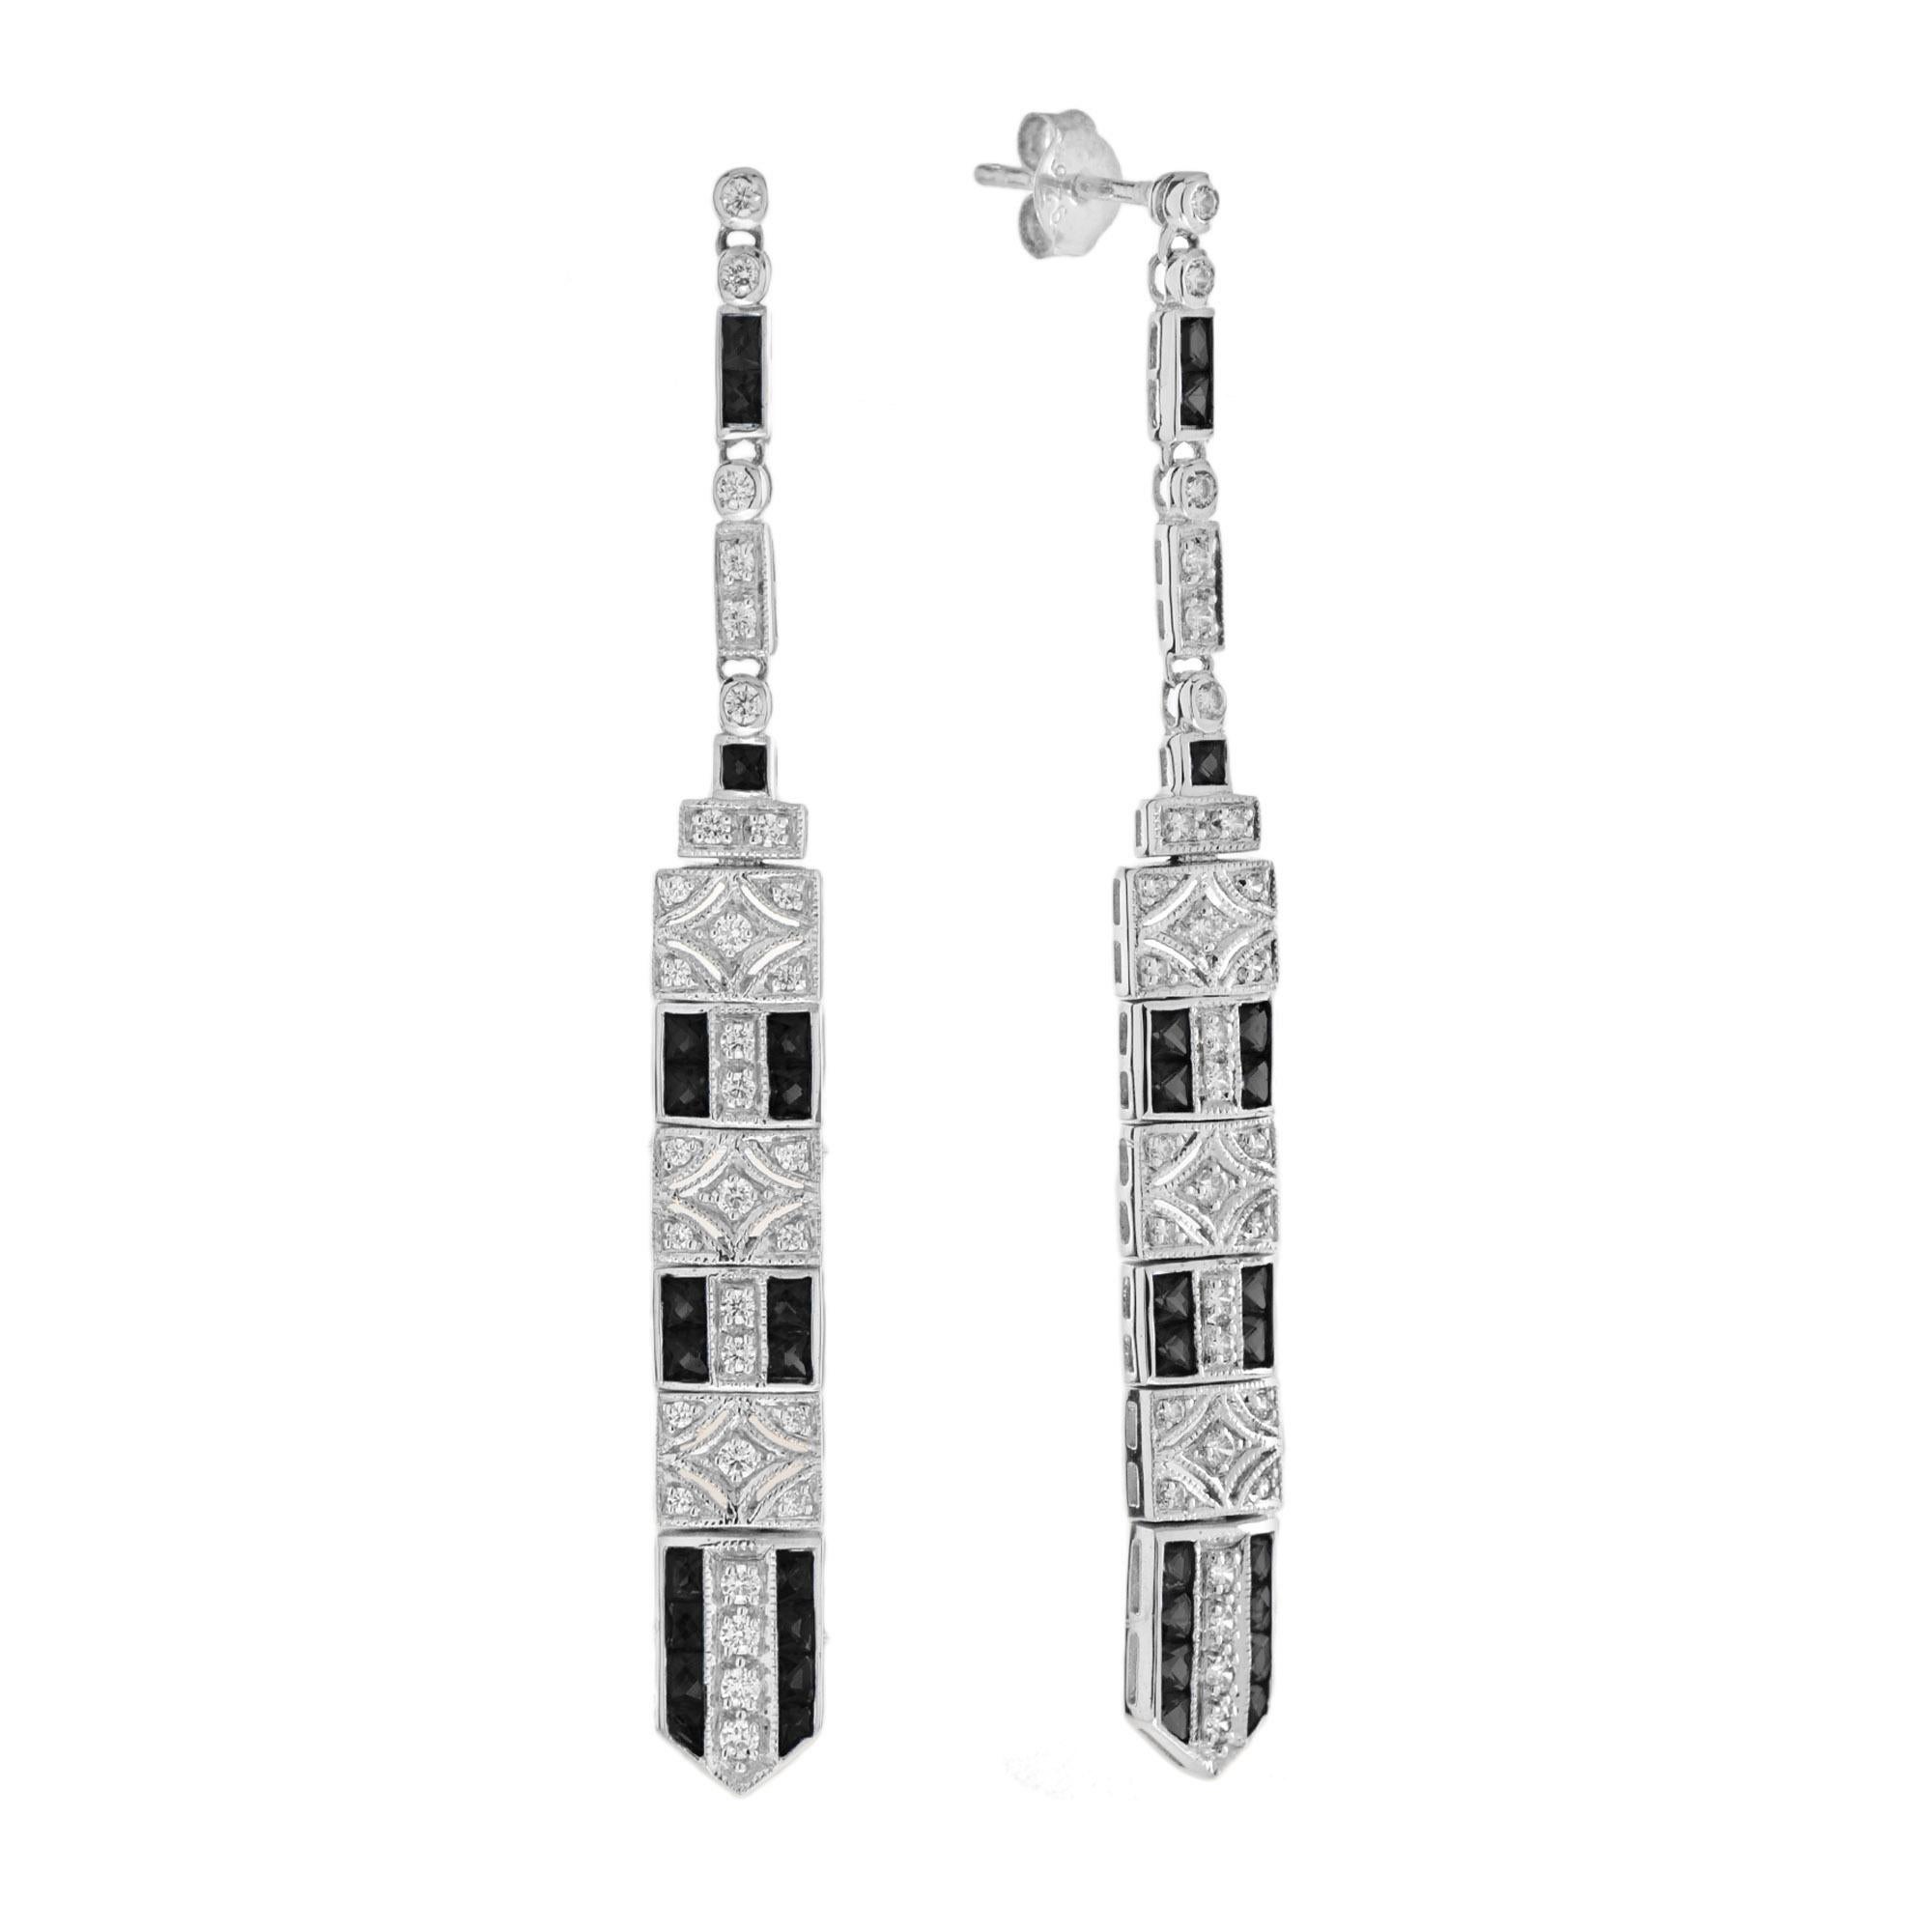 These art deco bar dangle earrings are the epitome of vintage-inspired elegance featuring mesmerizing geometric patterns feature with onyx and diamonds.

Information
Metal: 14K White Gold
Width: 6 mm.
Length: 62 mm.
Weight: 7.90 g. (approx. total